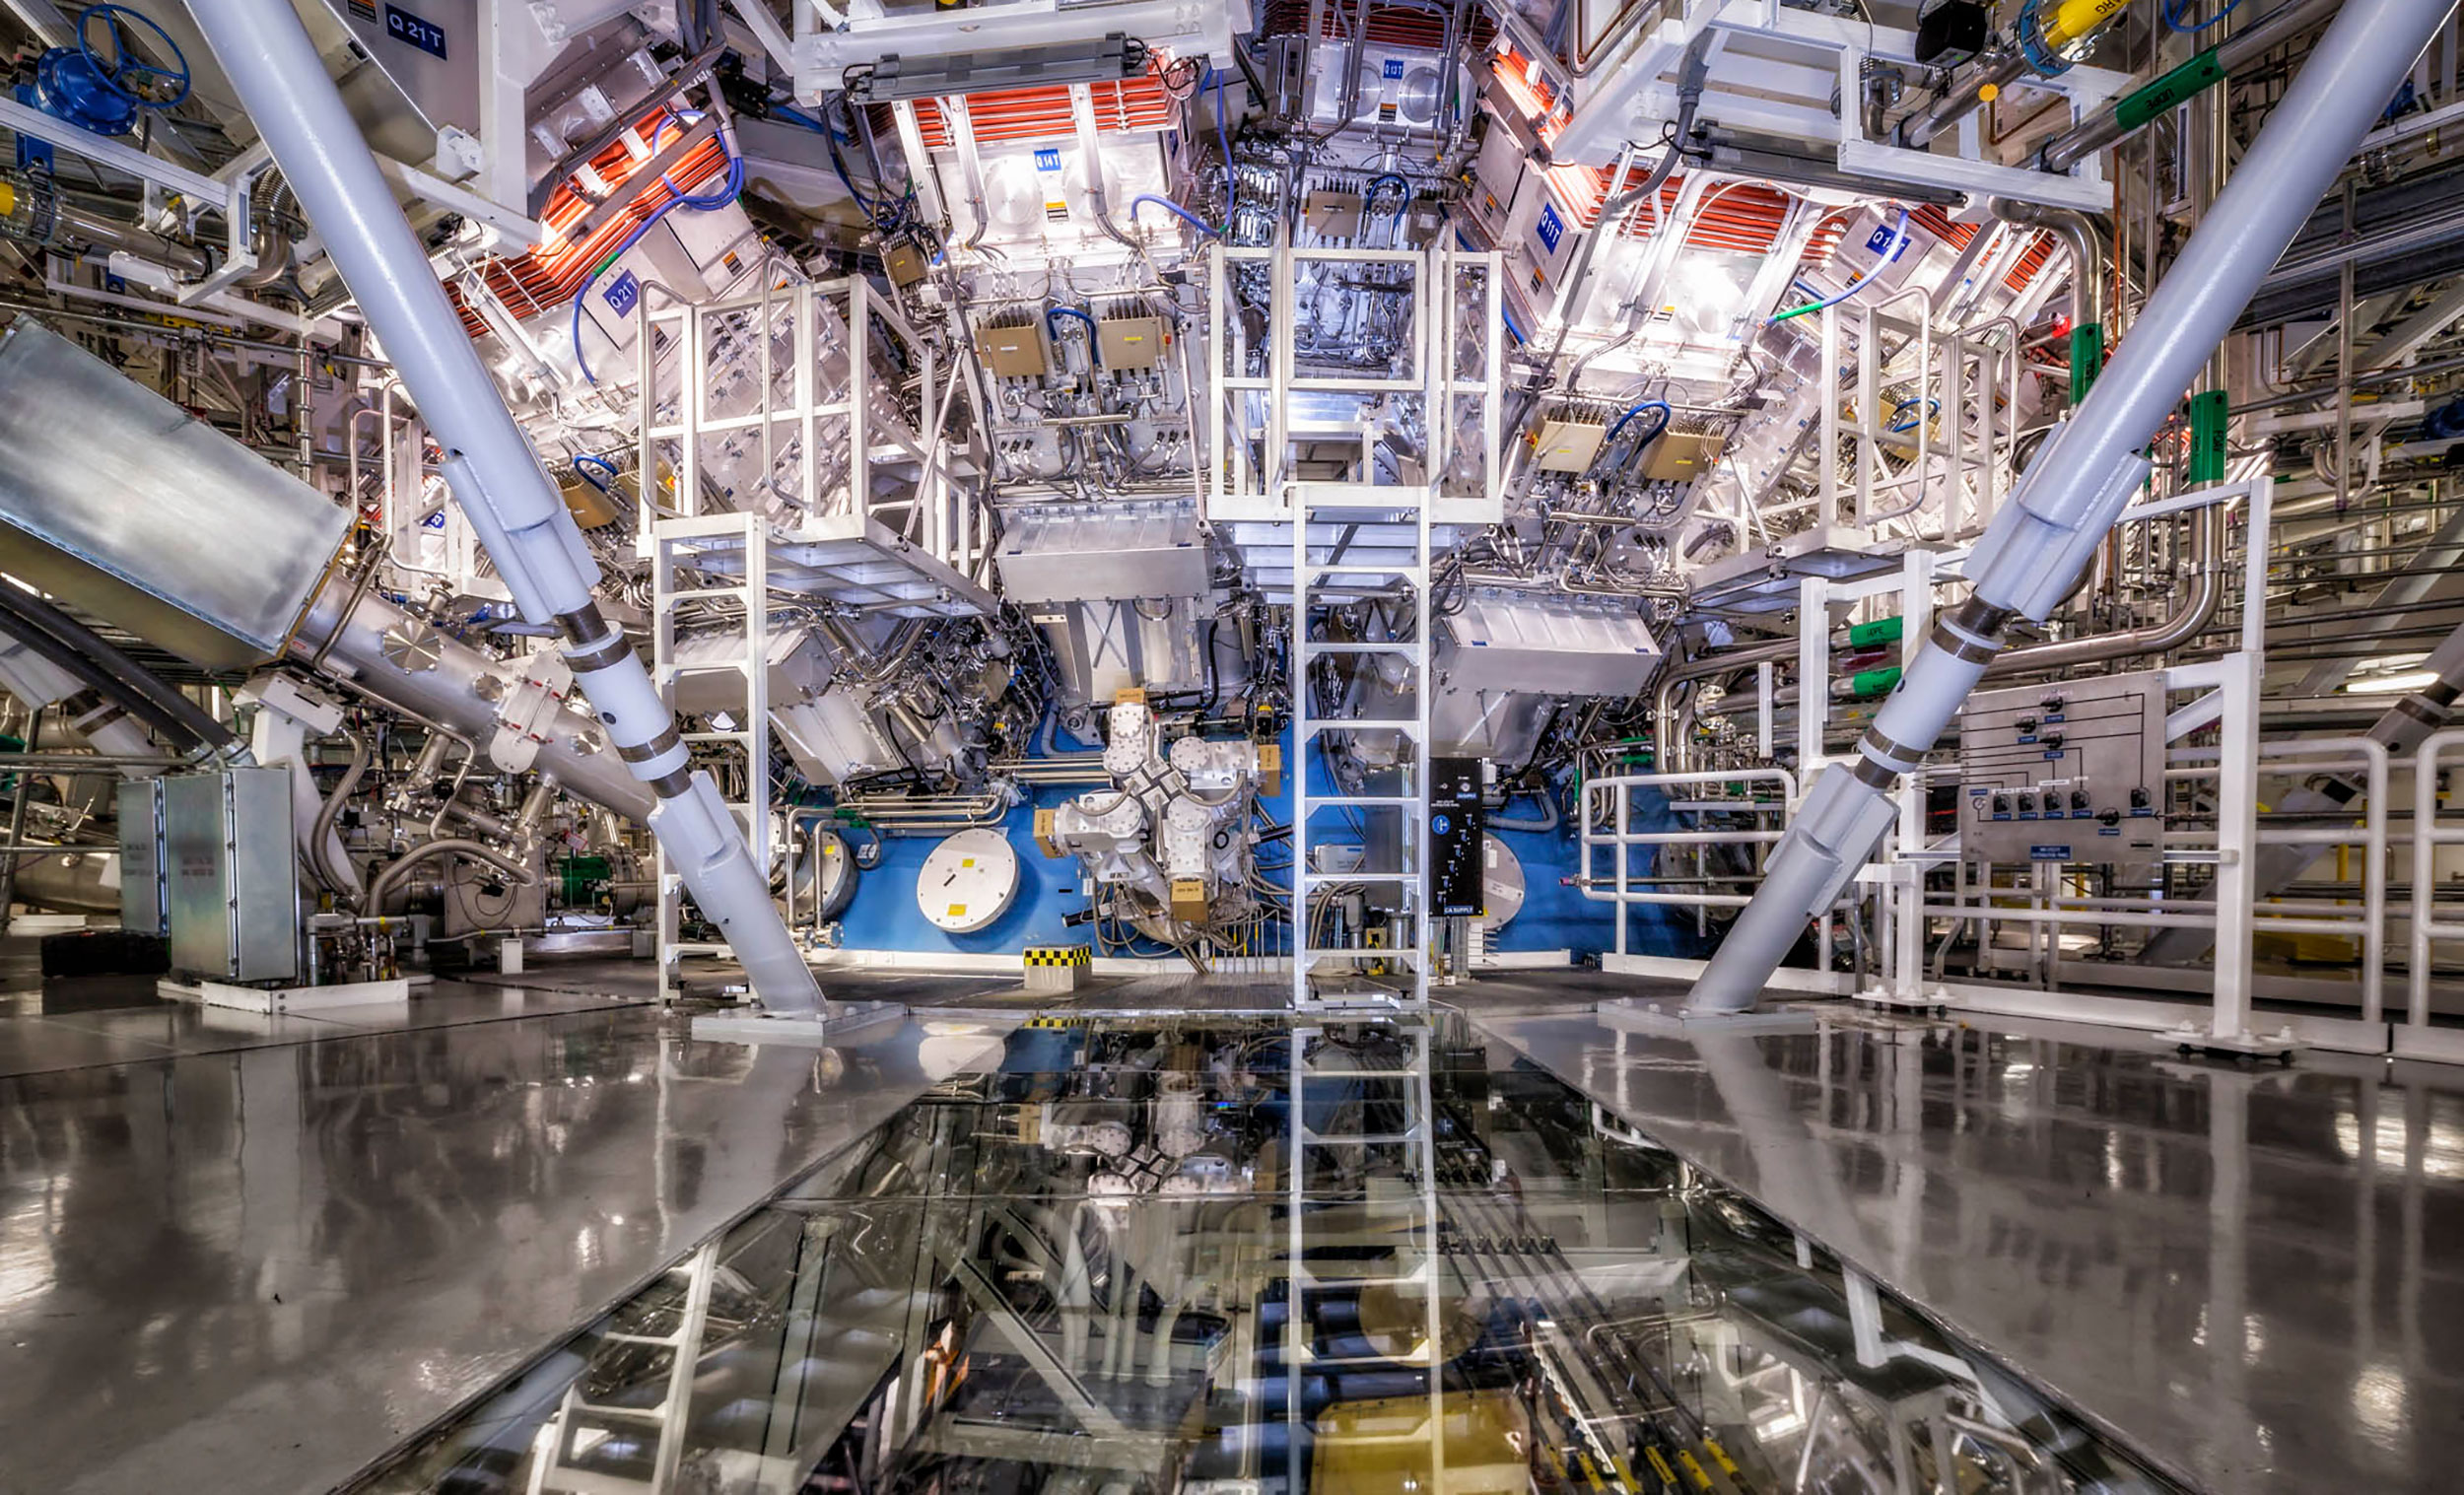 The National Ignition Facility's target chamber at the Lawrence Livermore National Laboratory in California is where the magic happens -- temperatures of 100 million degrees and pressures extreme enough to compress the target to densities up to 100 times the density of lead are created there.